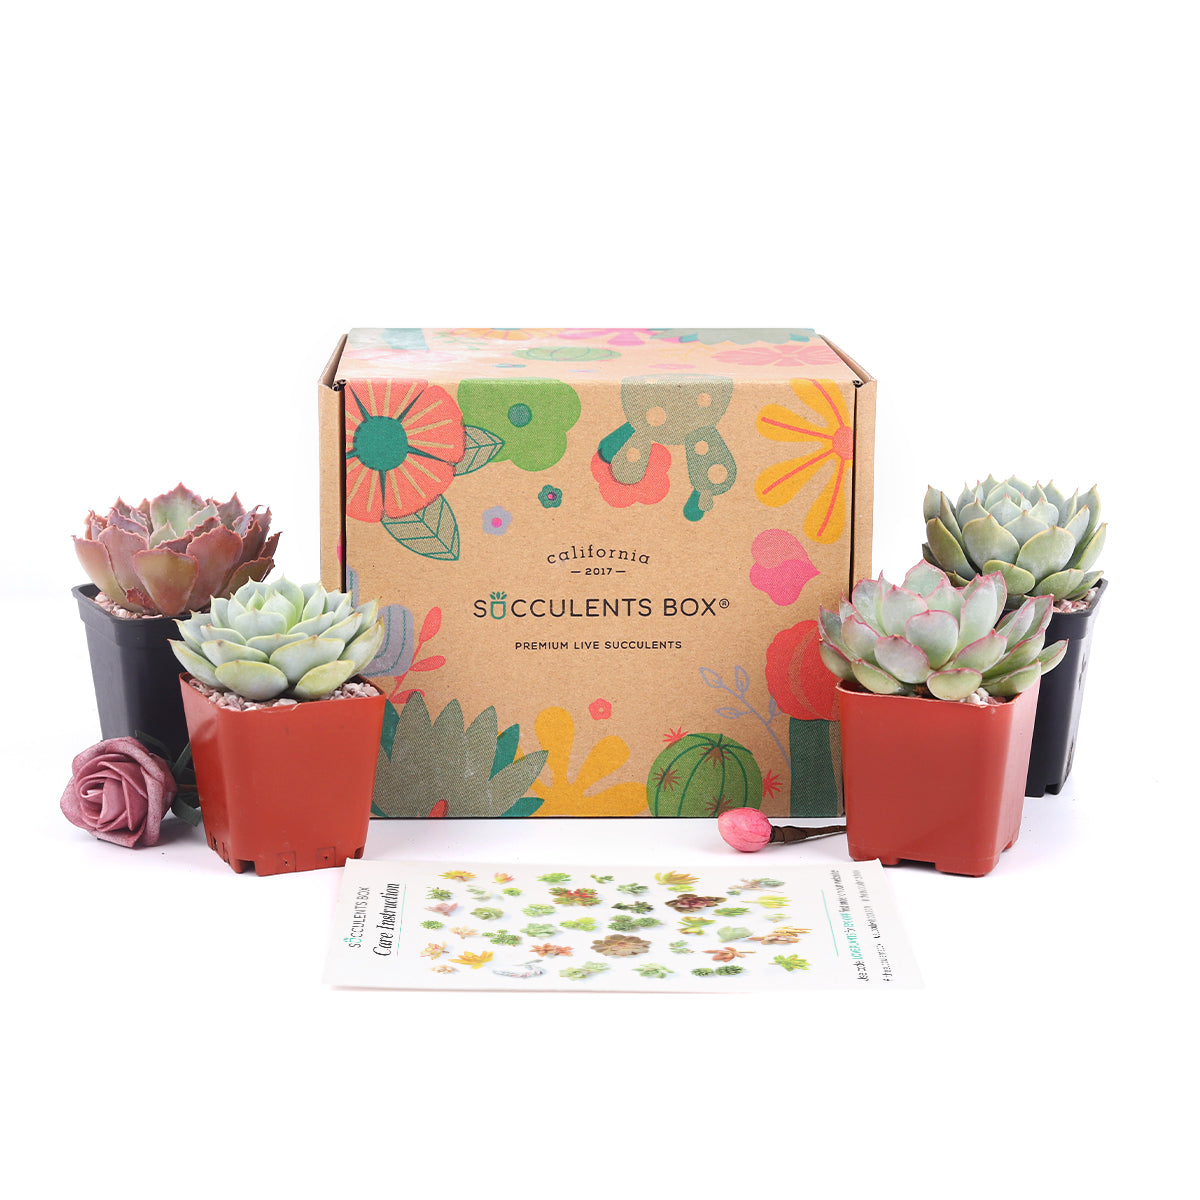 subscription box service, eco friendly subscription box, plant box subscription, sustainable subscription box, Succulents for Sale, Types of Succulents, Succulents Shop in California, Succulents and Cactus Plants, Subscription Box with Care Instruction, Succulent Subscription Box